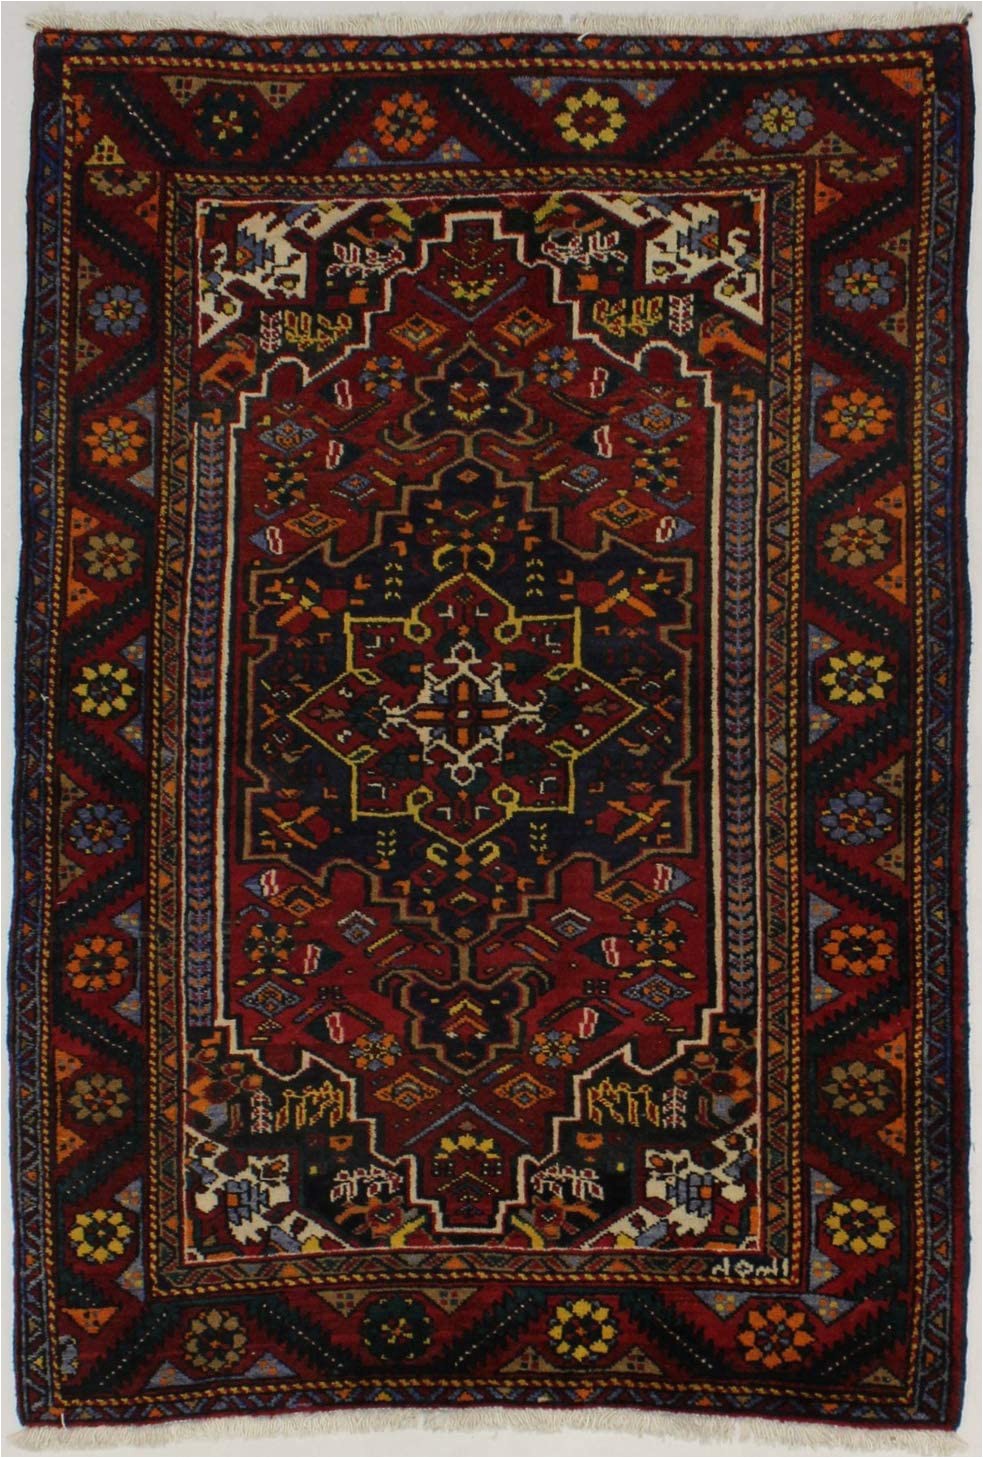 Colorful area Rugs for Sale Magic Rugs Colorful Handmade Unique Patterned Floor Persian